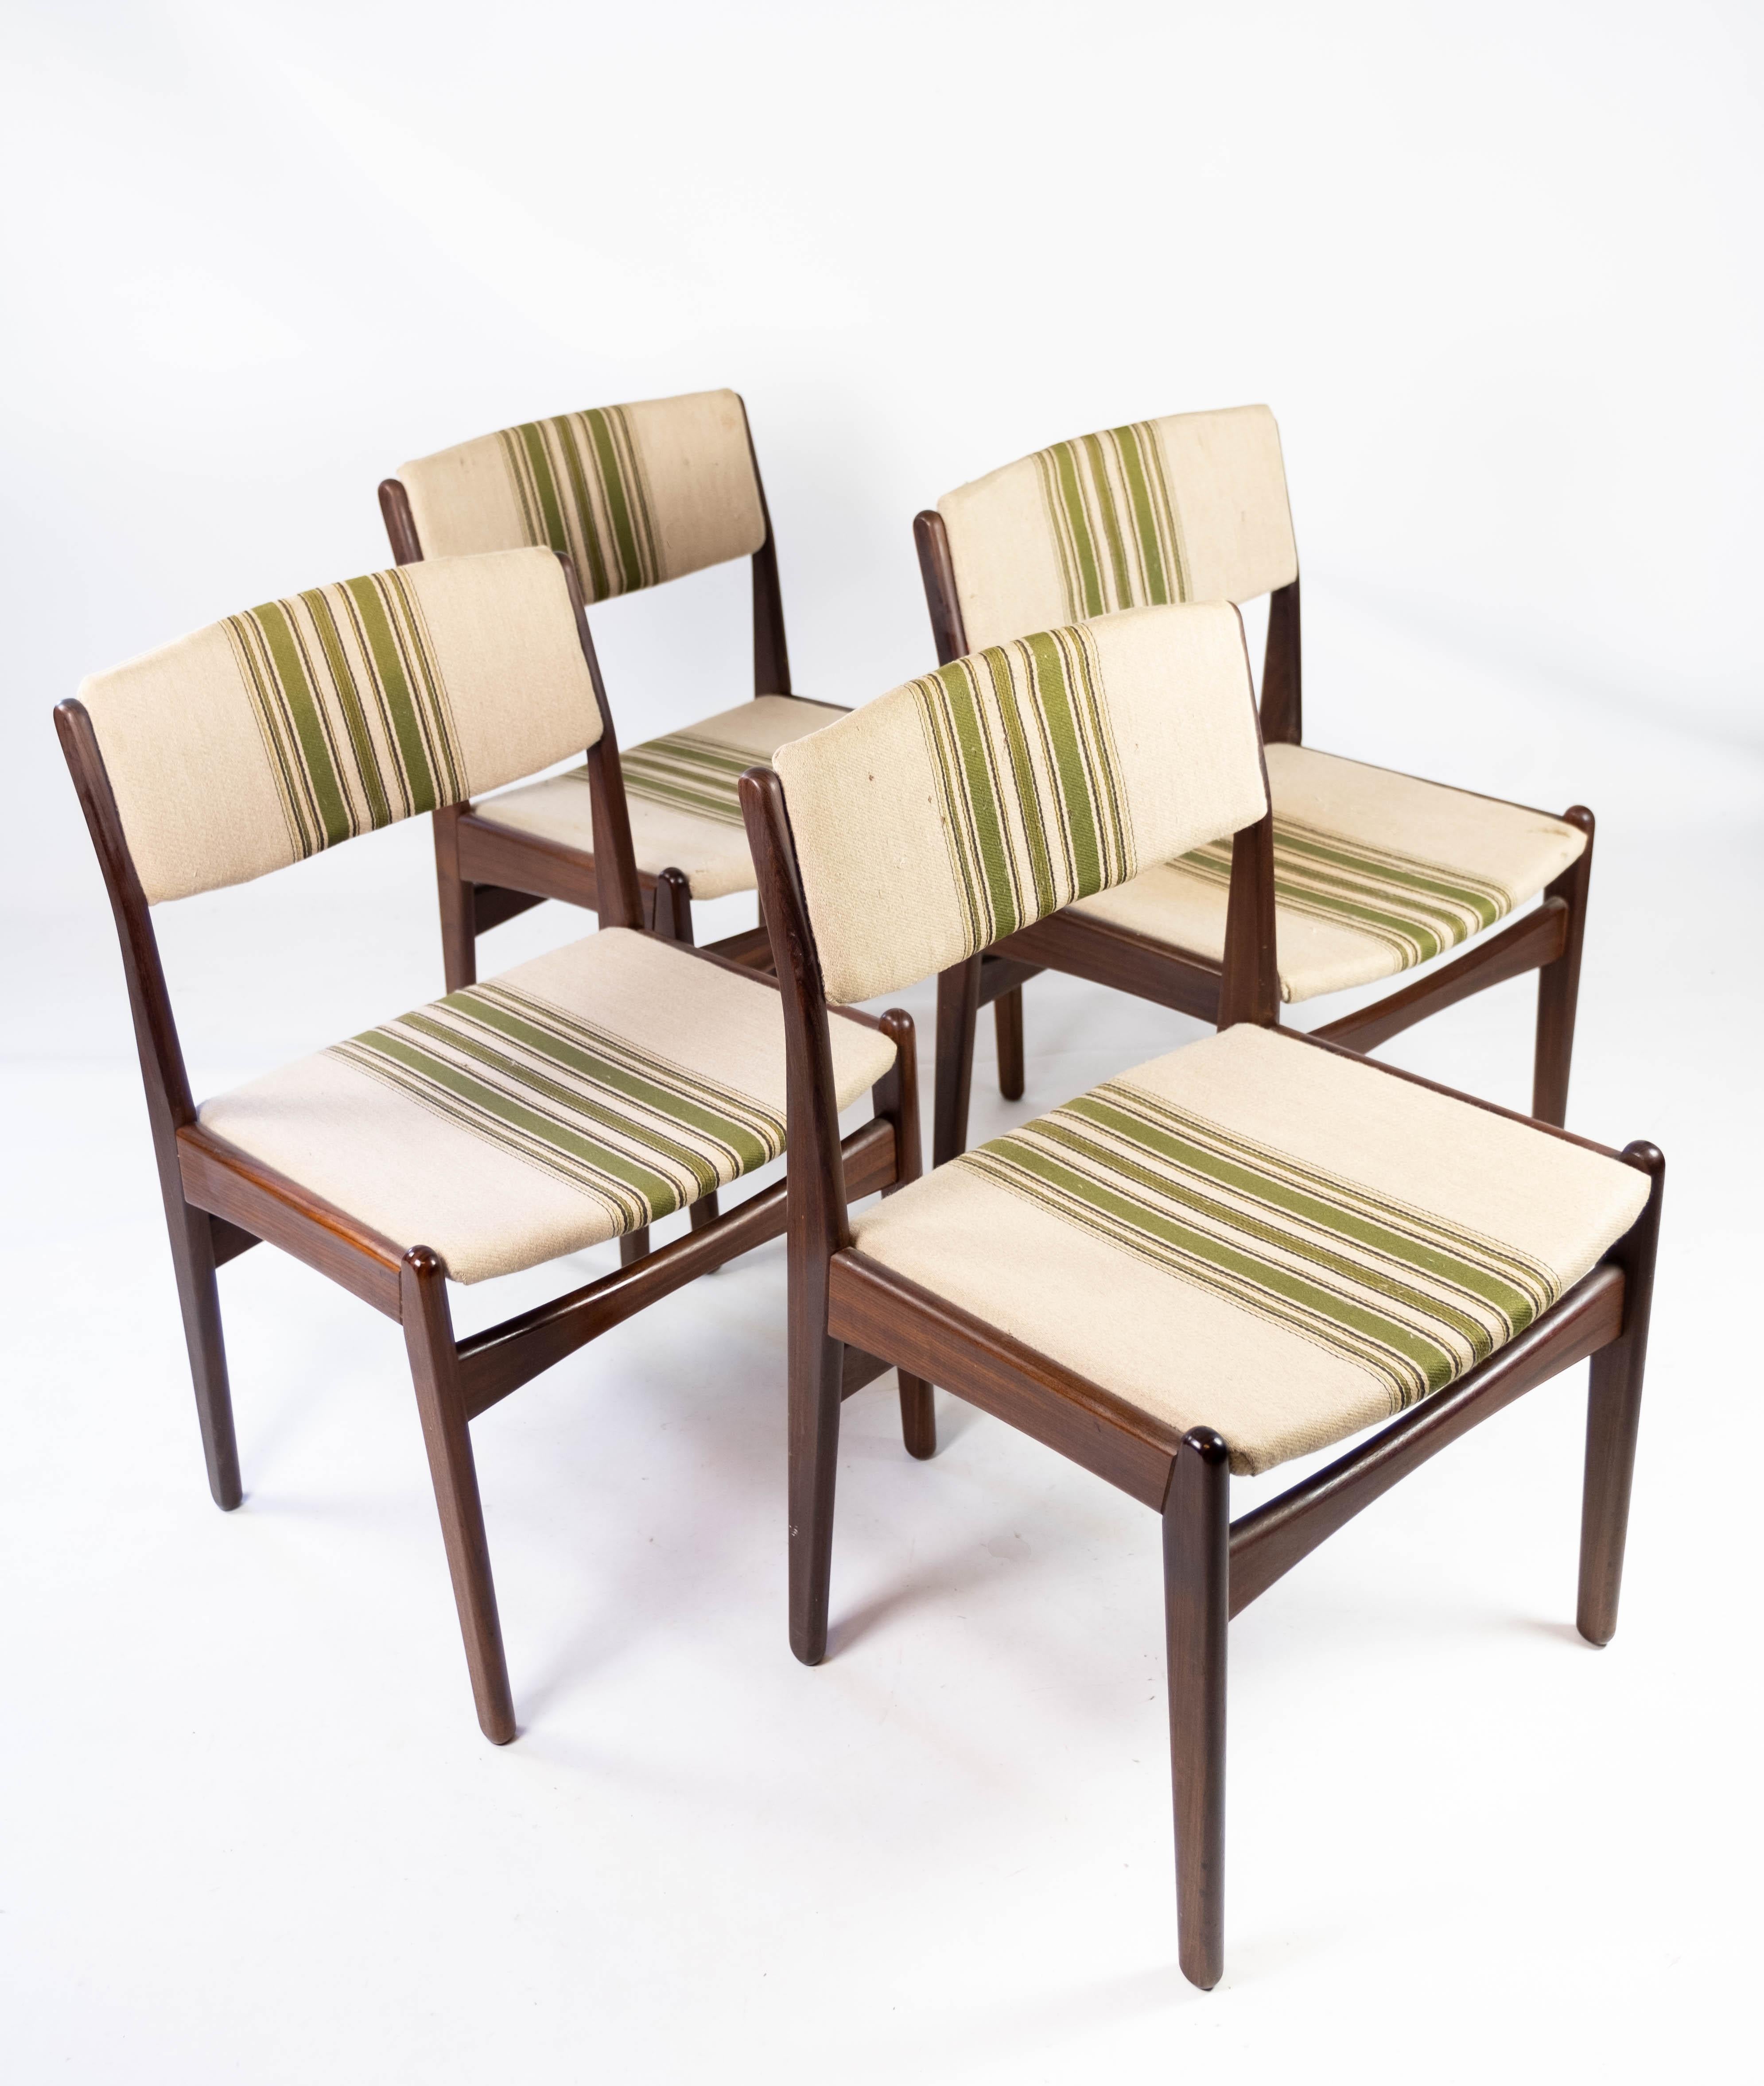 Mid-20th Century Set of Four Dining Room Chairs in Teak by Erik Buch, 1960